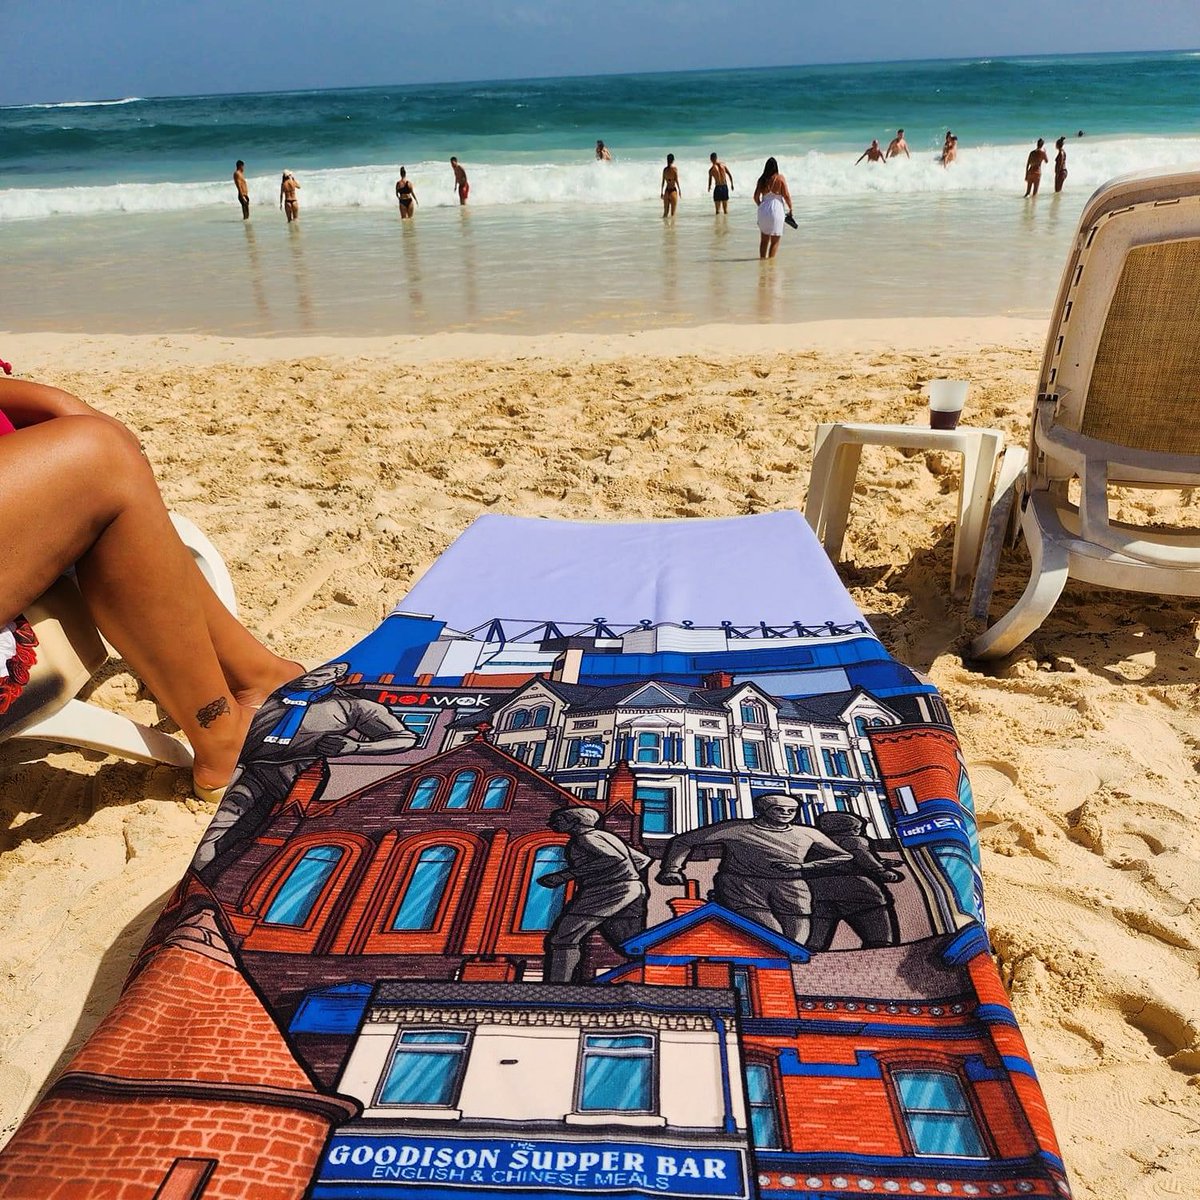 🥳 COMPETITION TIME 🥳 To be in with a chance of winning one of my popular matchday beach towels 😎 Just: - Follow us📱 - RT this post💙 - Tag a blue mate🙋🏼‍♂️ Winner announced at 10pm on Monday Good luck. 💙 #Everton